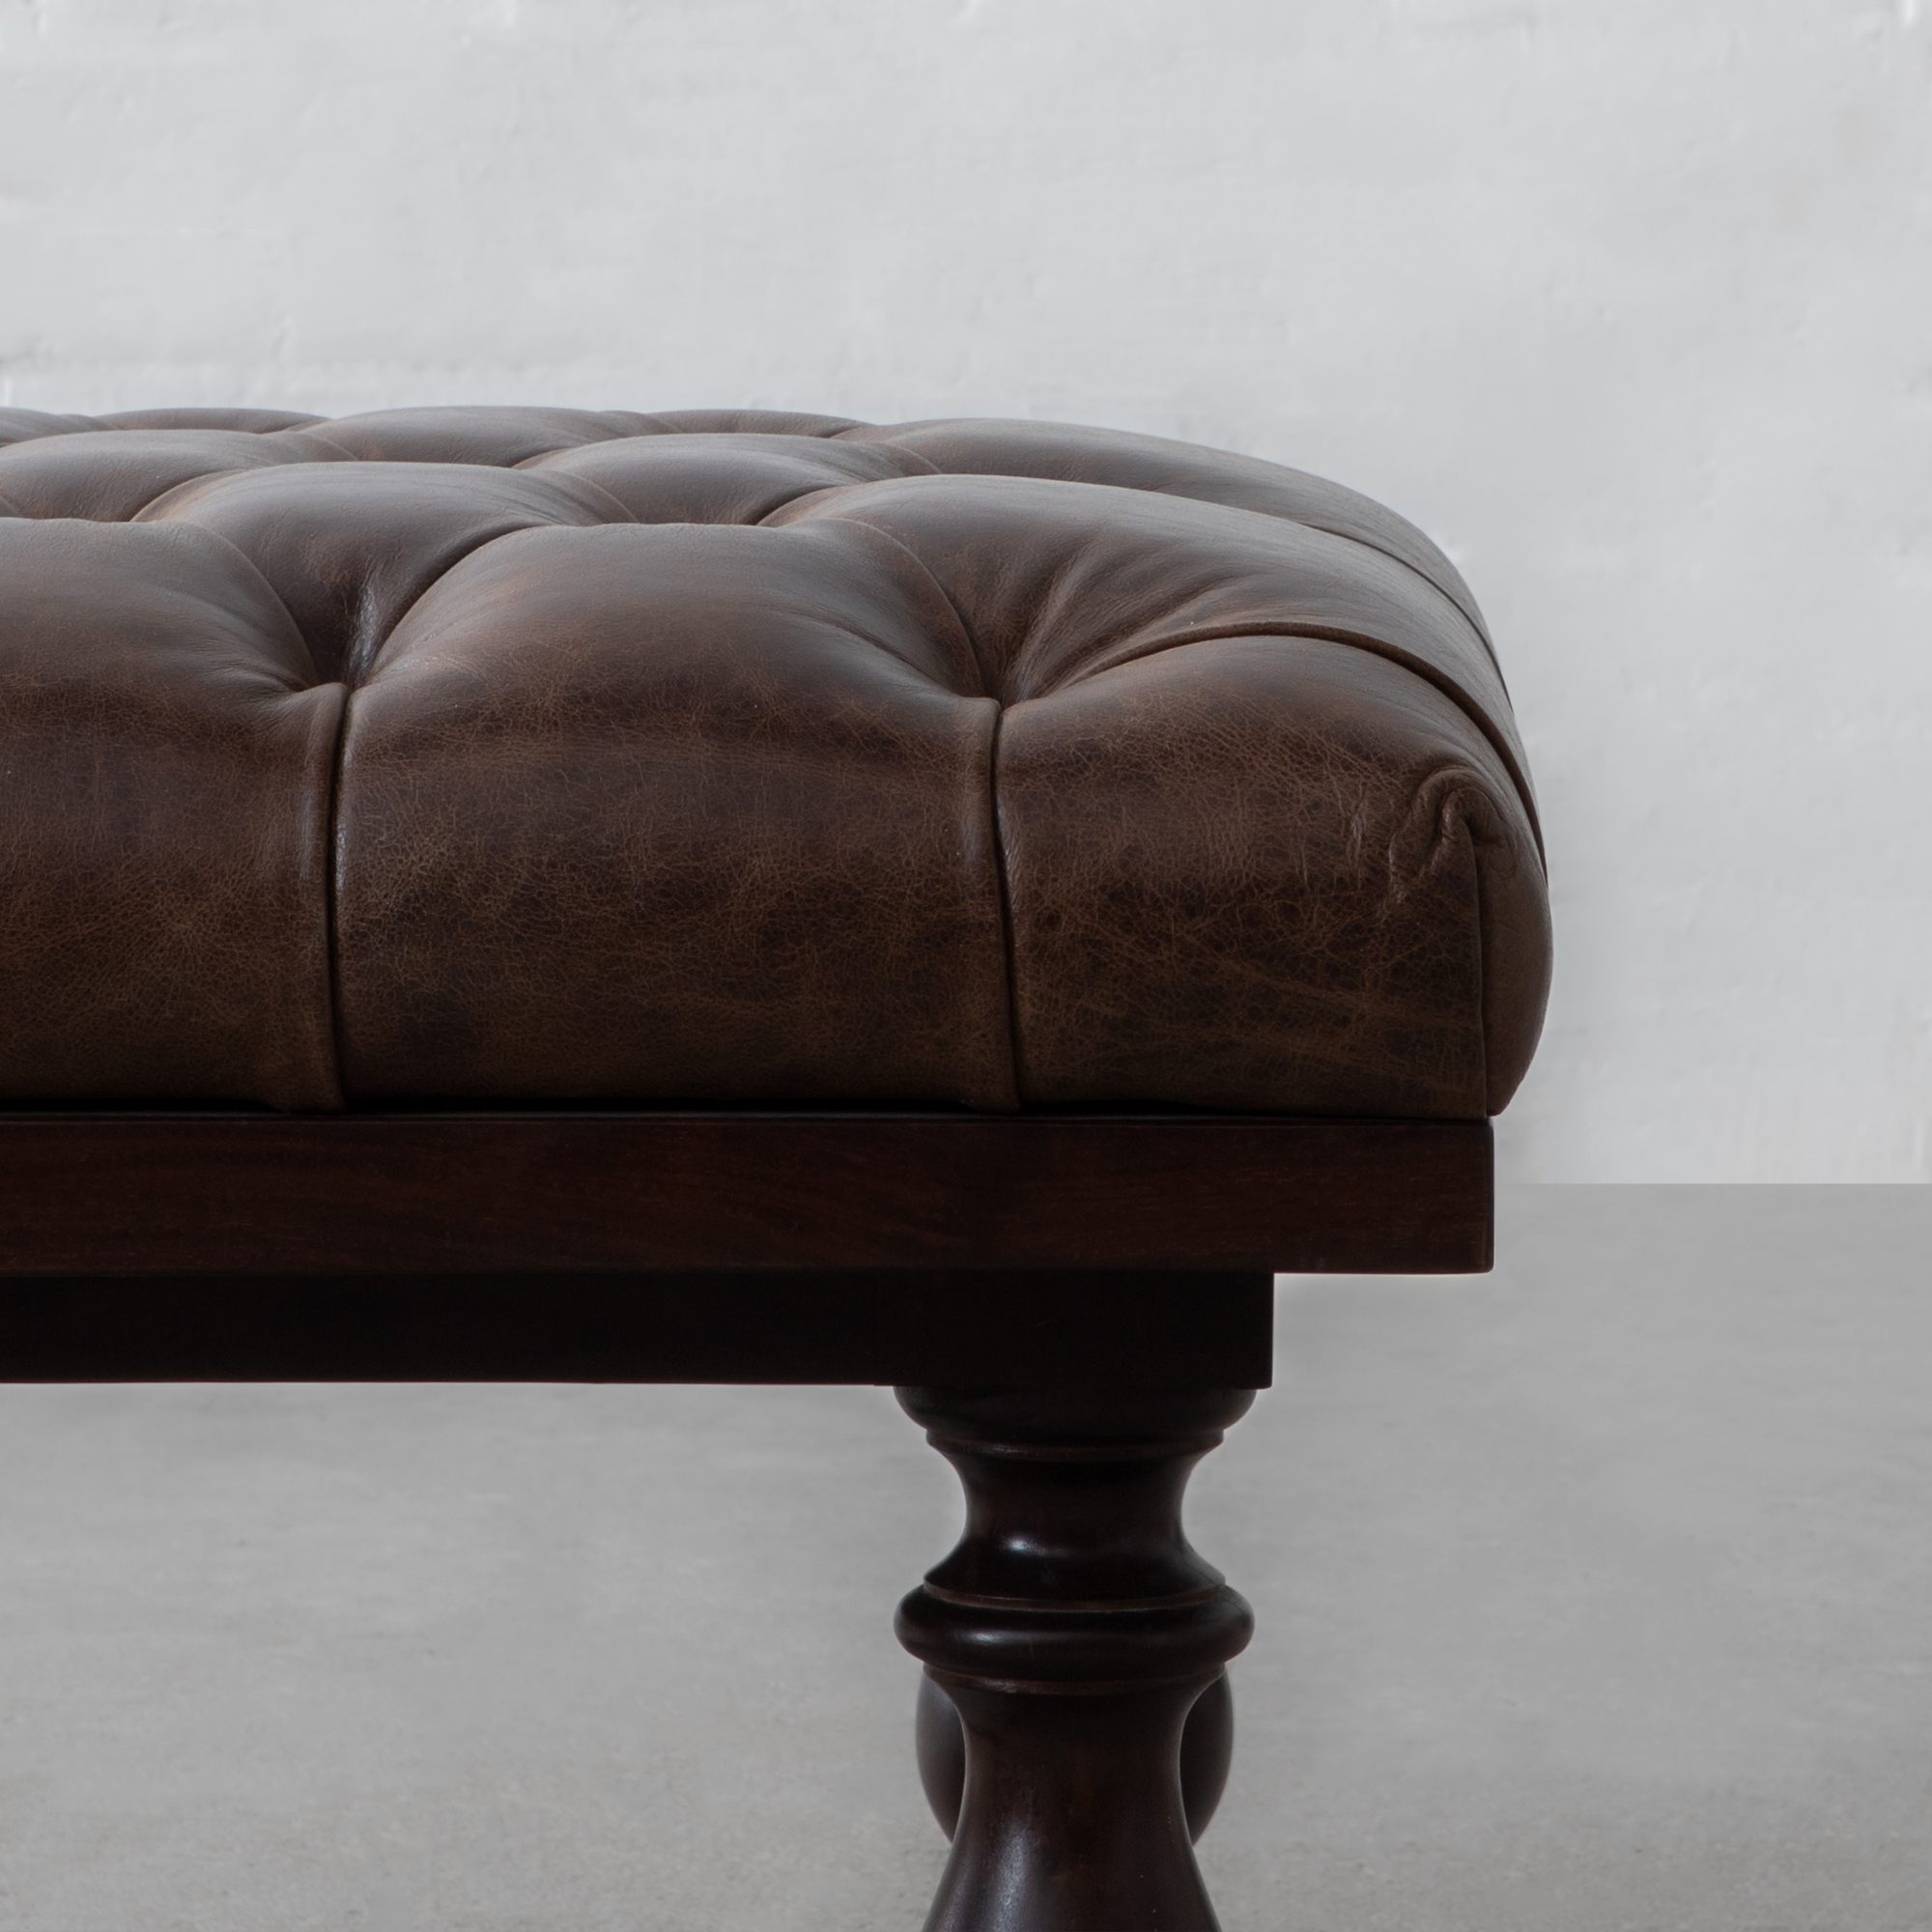 Faun Leather Tufted Coffee Table